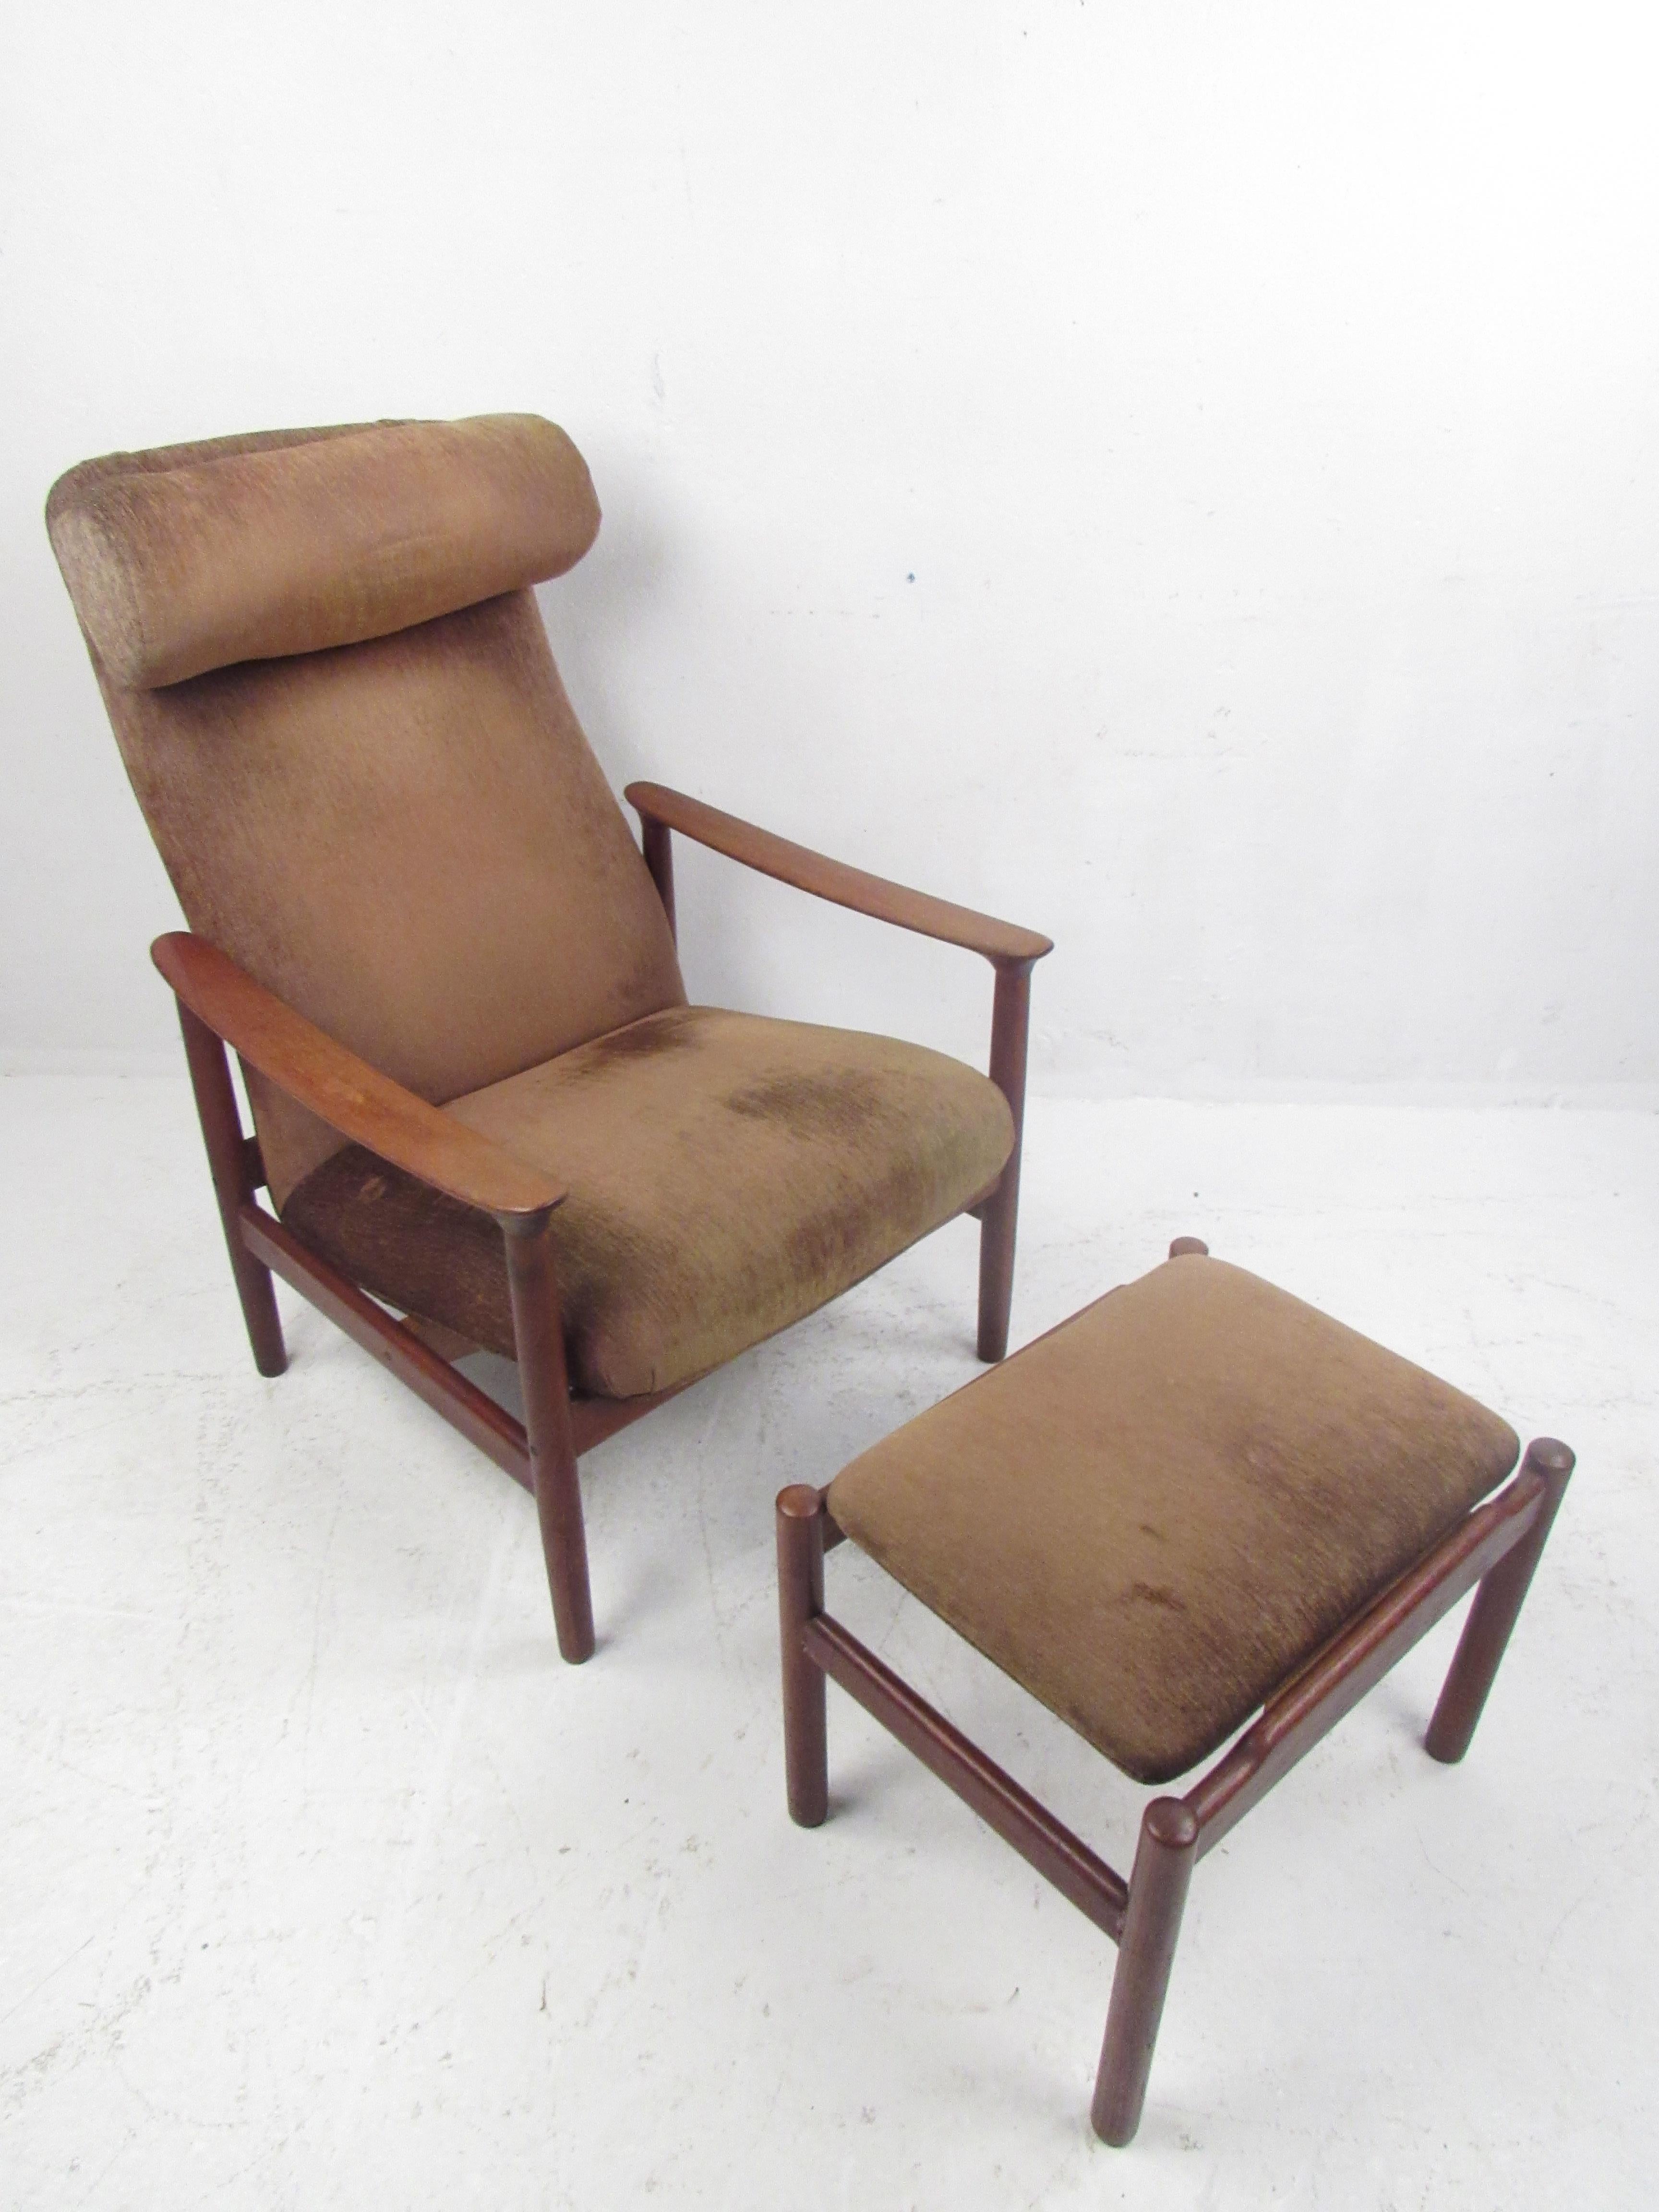 This beautiful vintage modern lounge chair and ottoman feature sculpted teak frames. A lovely Danish design that ensures comfort without sacrificing style in and seating arrangement. Please confirm the item location (NY or NJ). 

Measures: Chair: